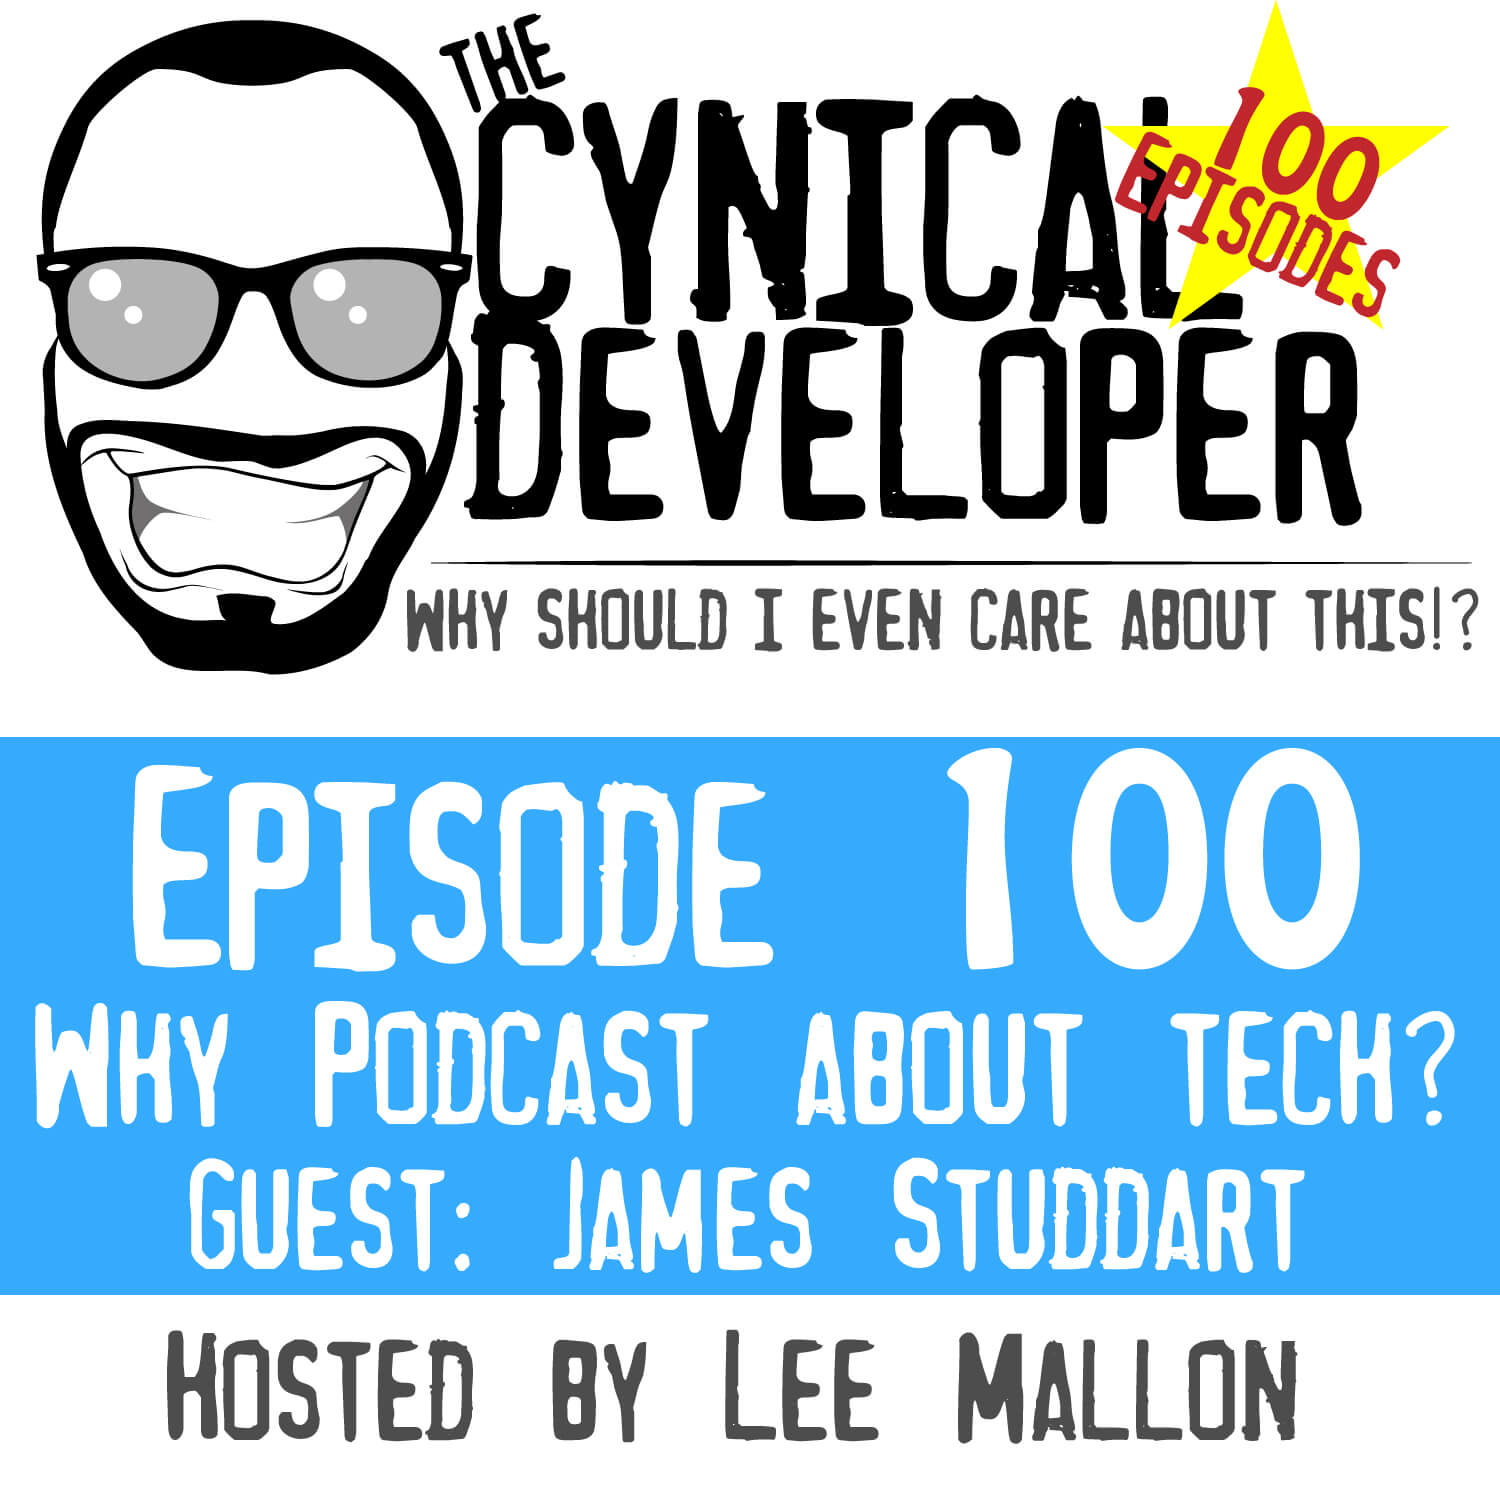 Episode 100 - Why podcast about Tech?